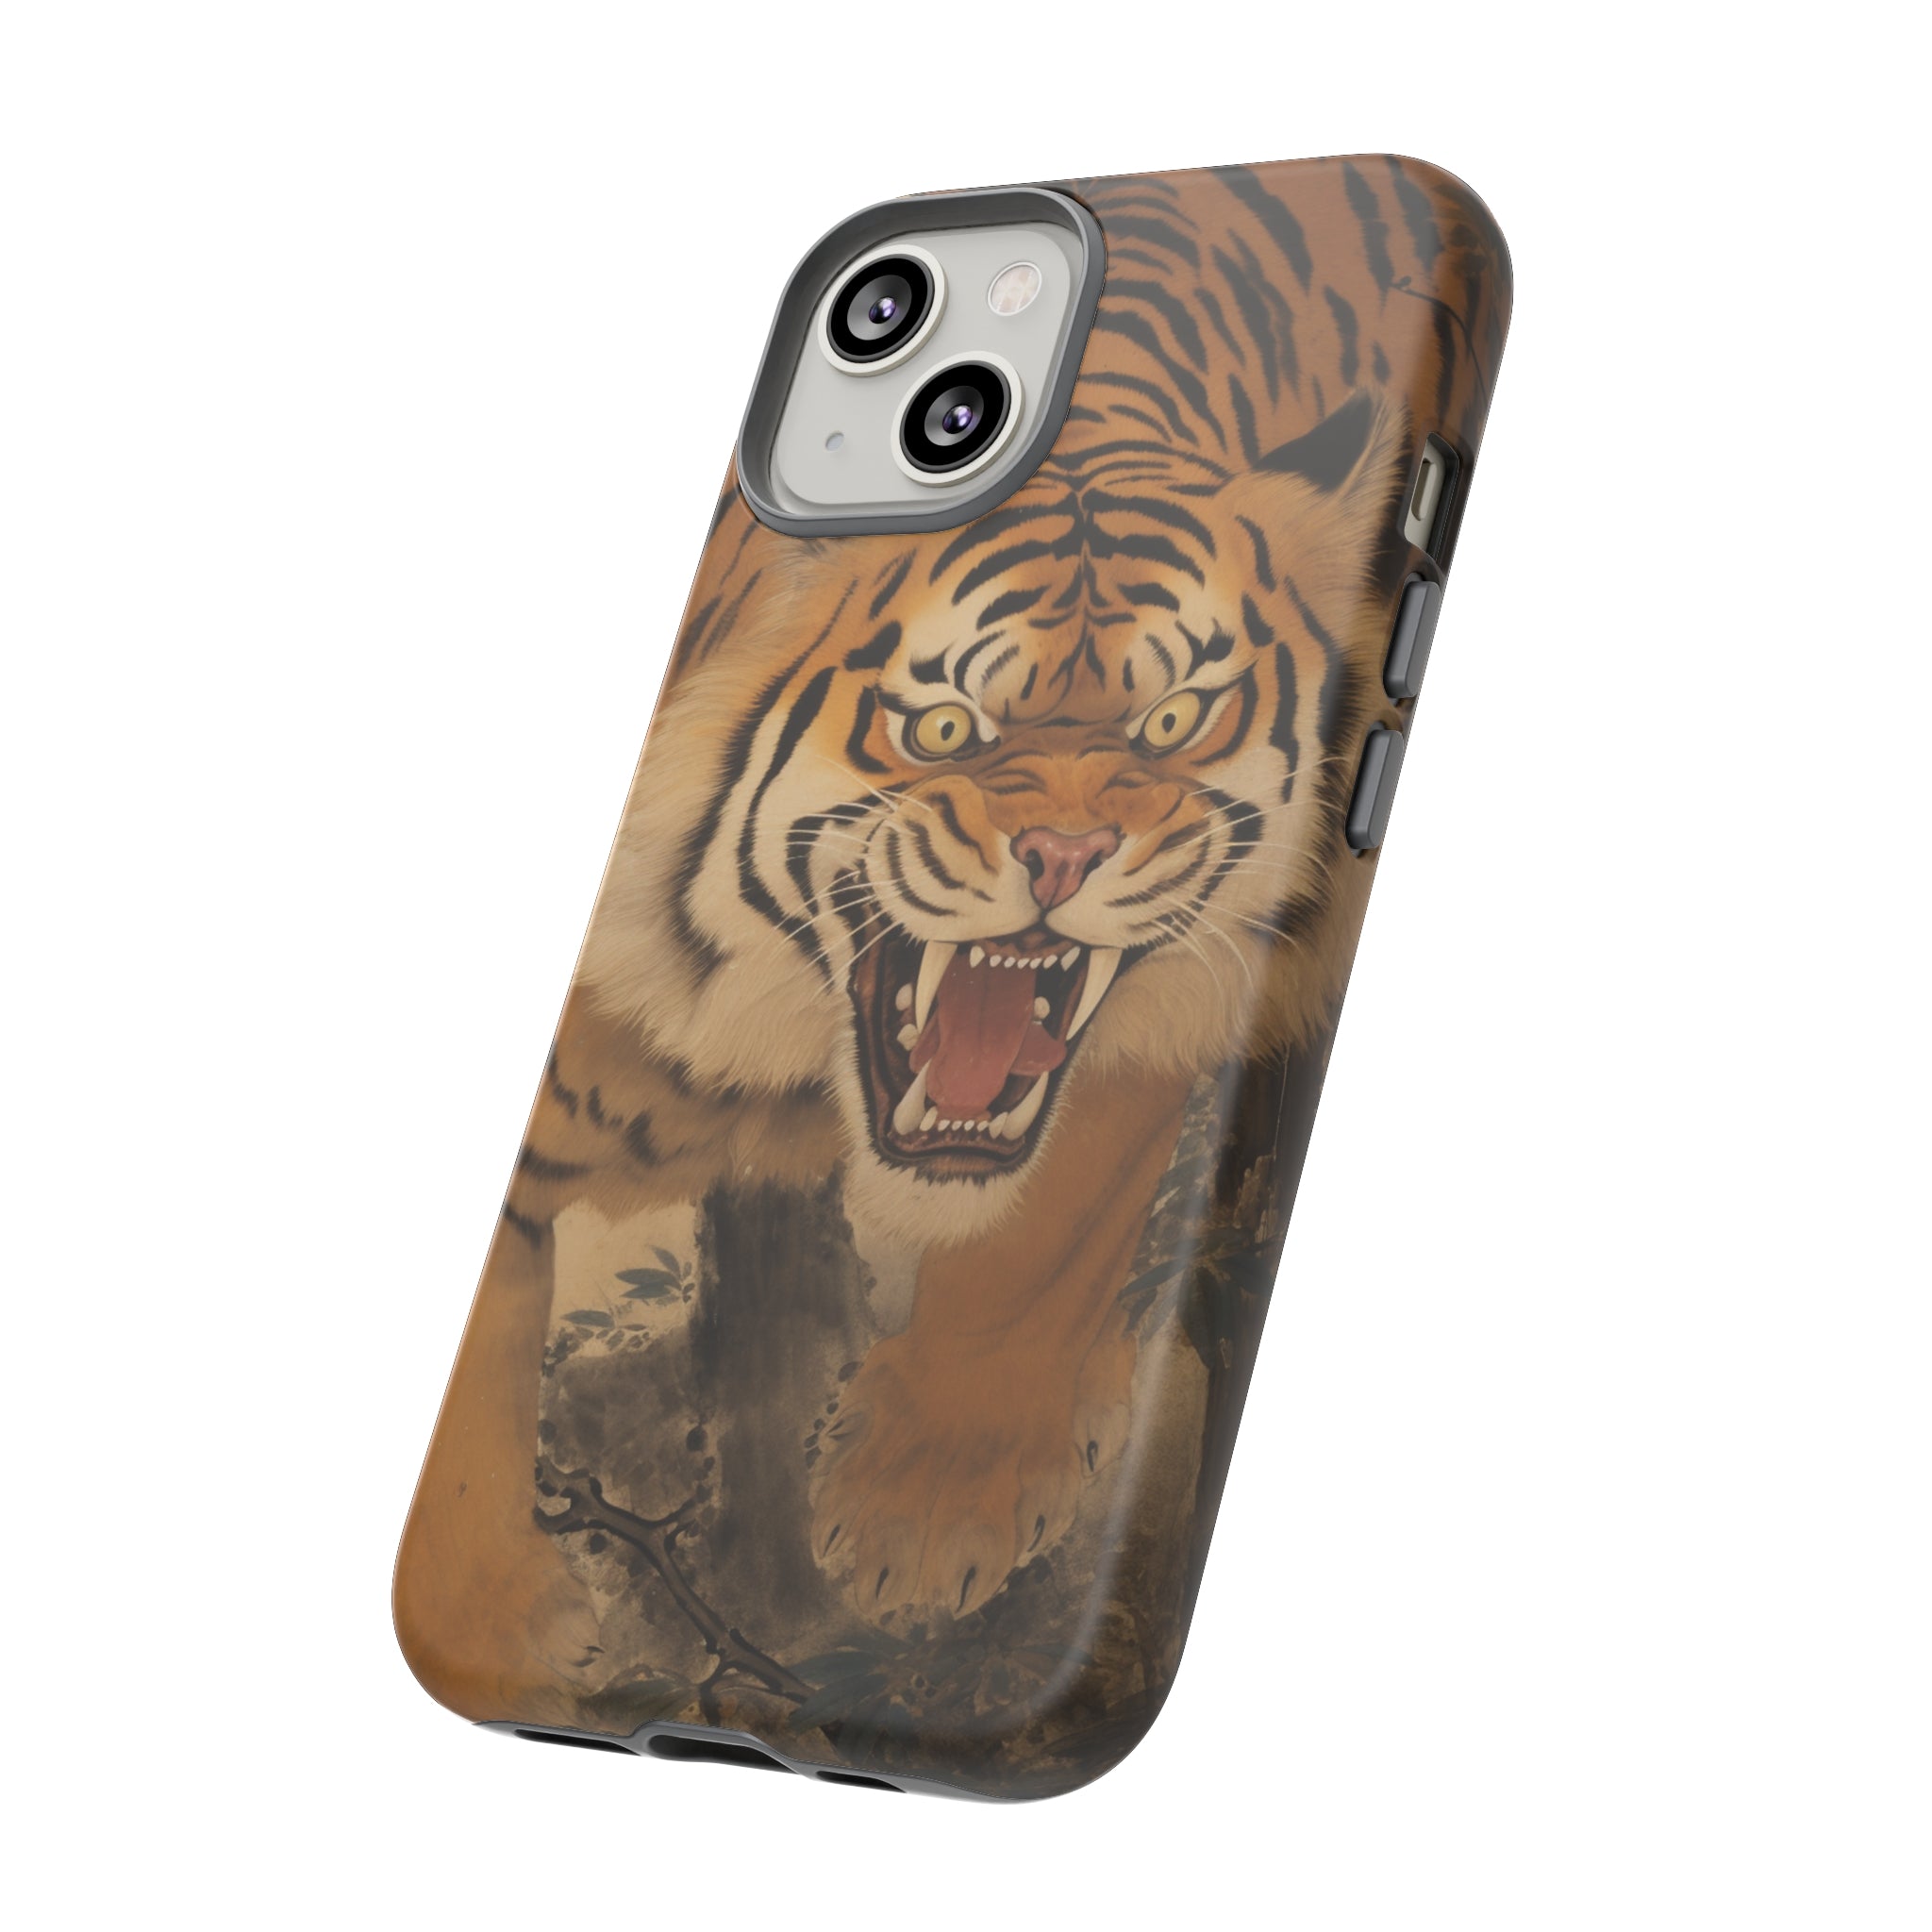 King Co. Phone Case